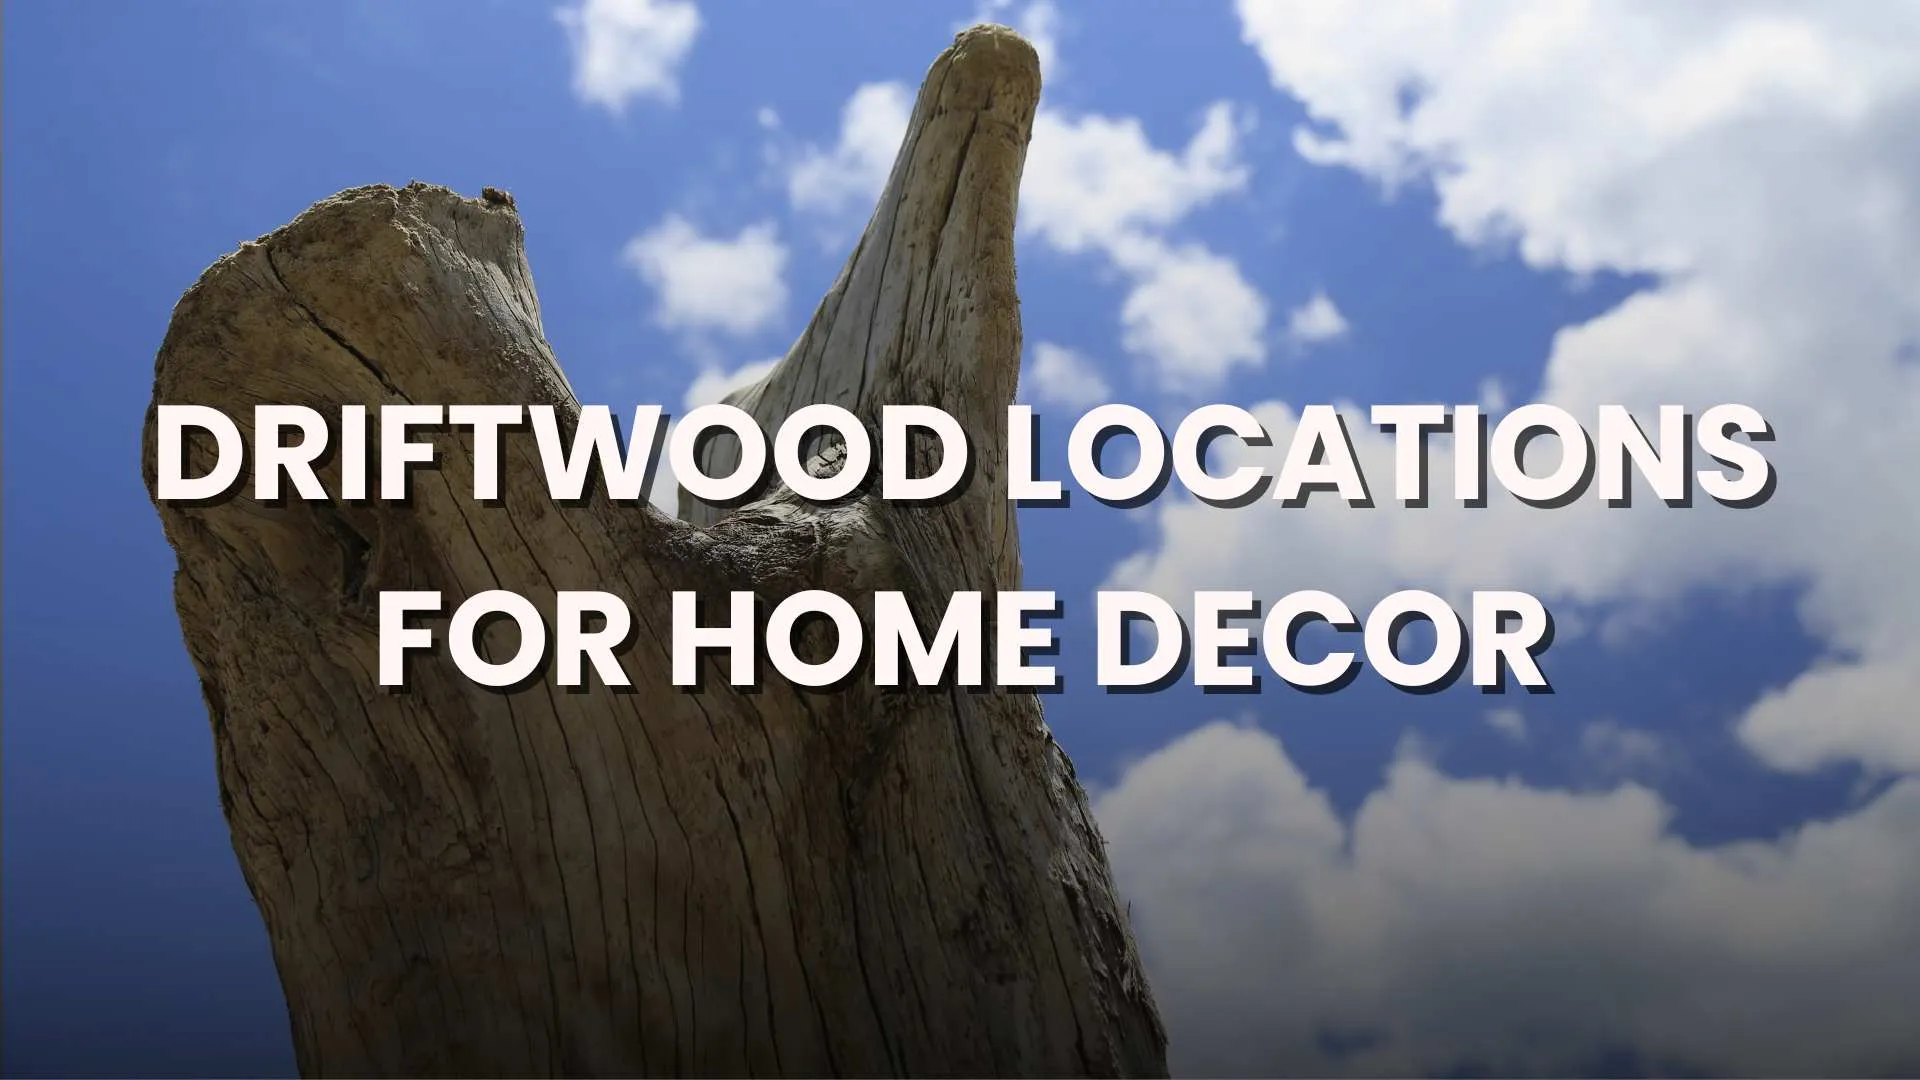 DRIFTWOOD LOCATIONS FOR HOME DECOR